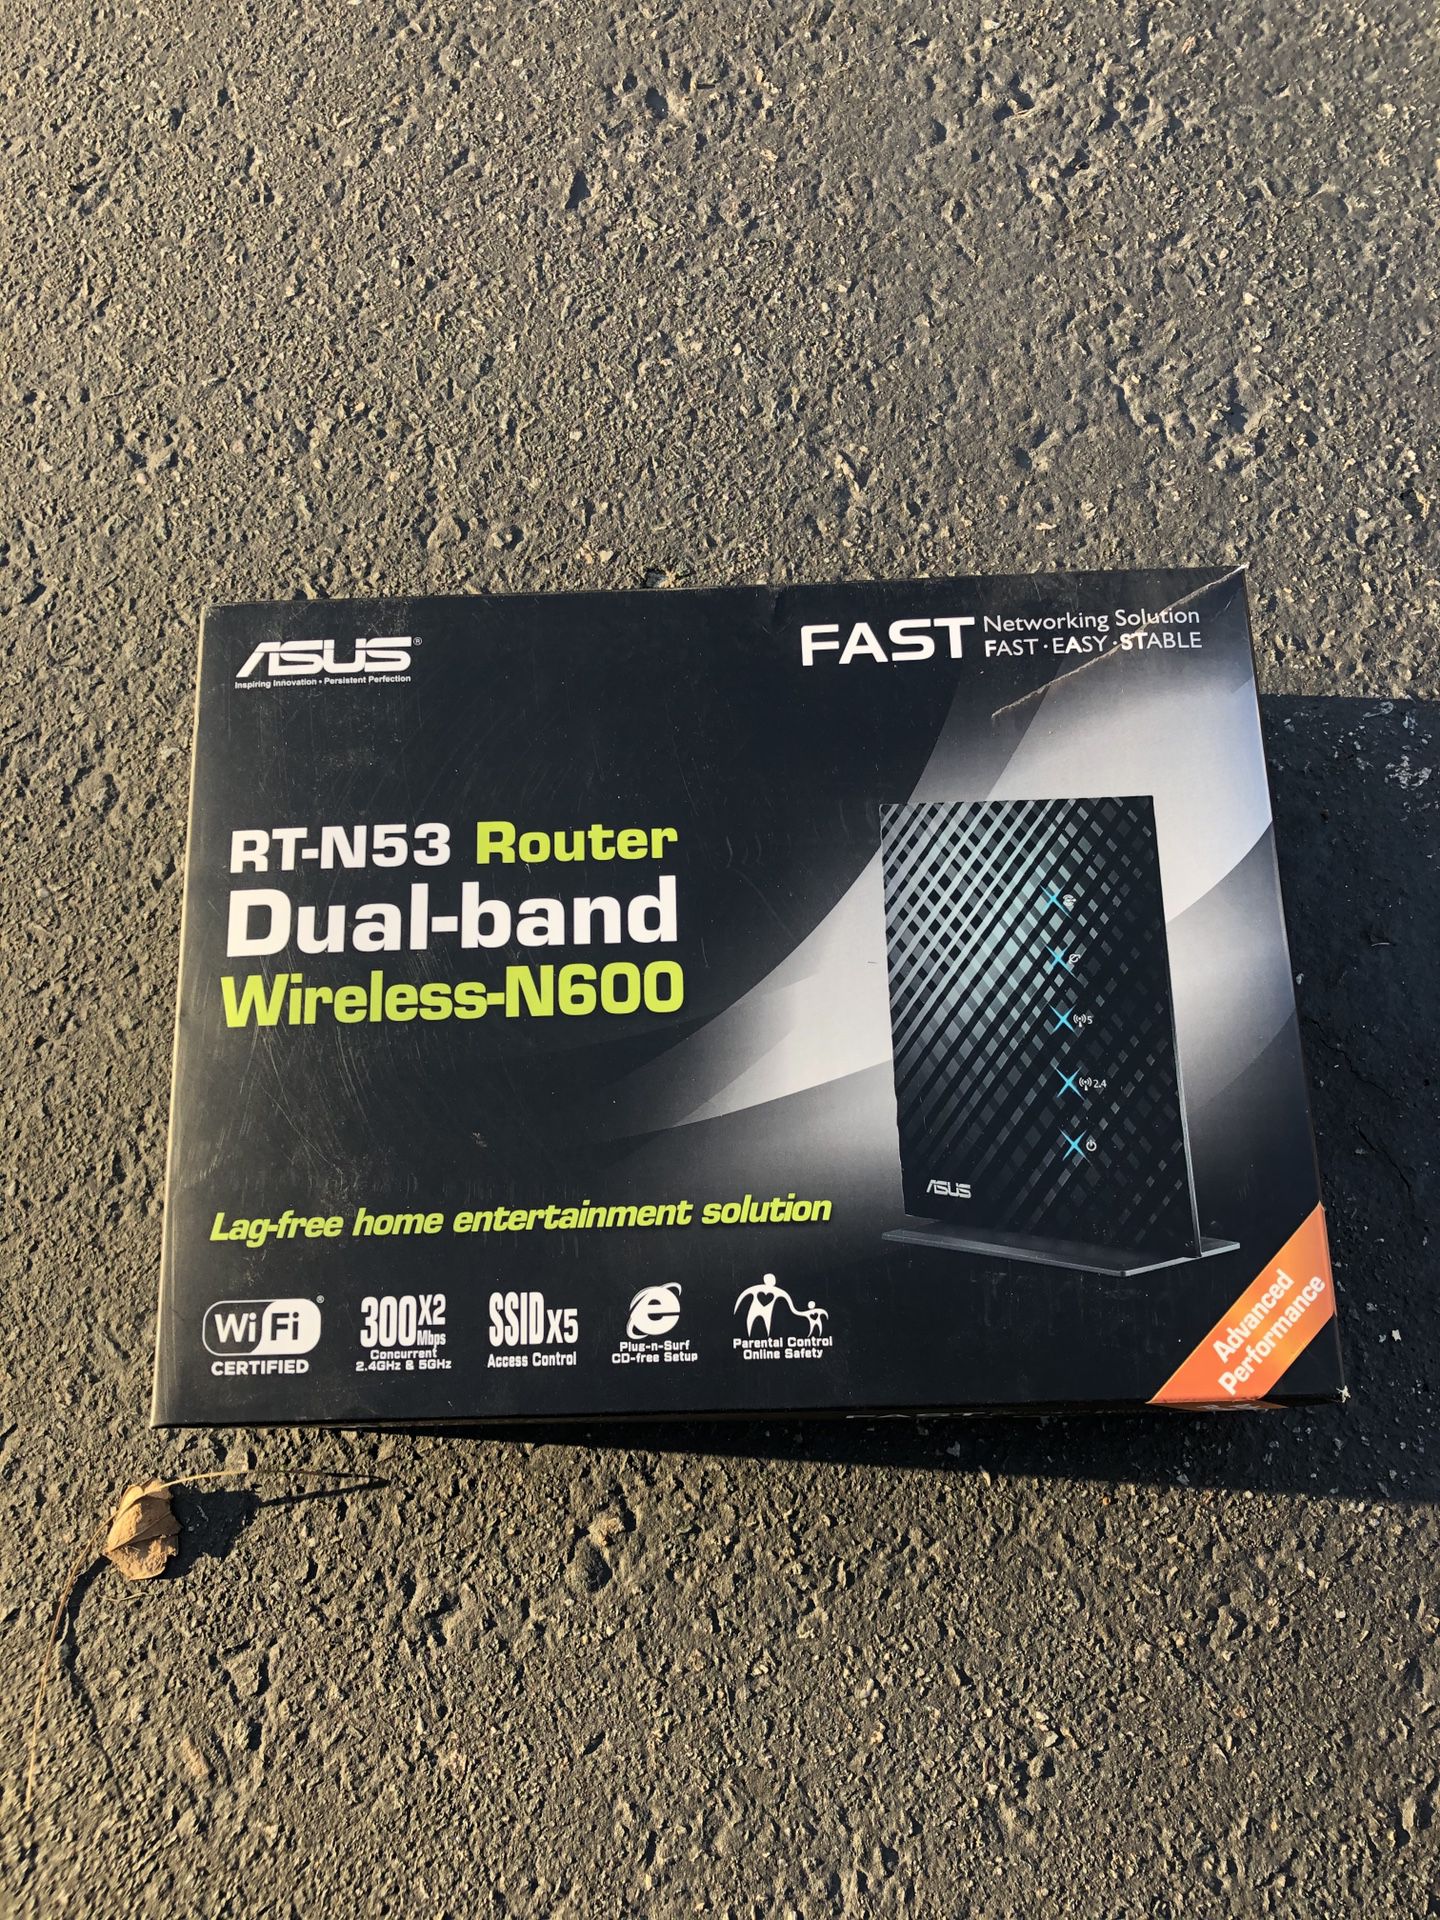 Asus RT-N53 Router Dual band wireless